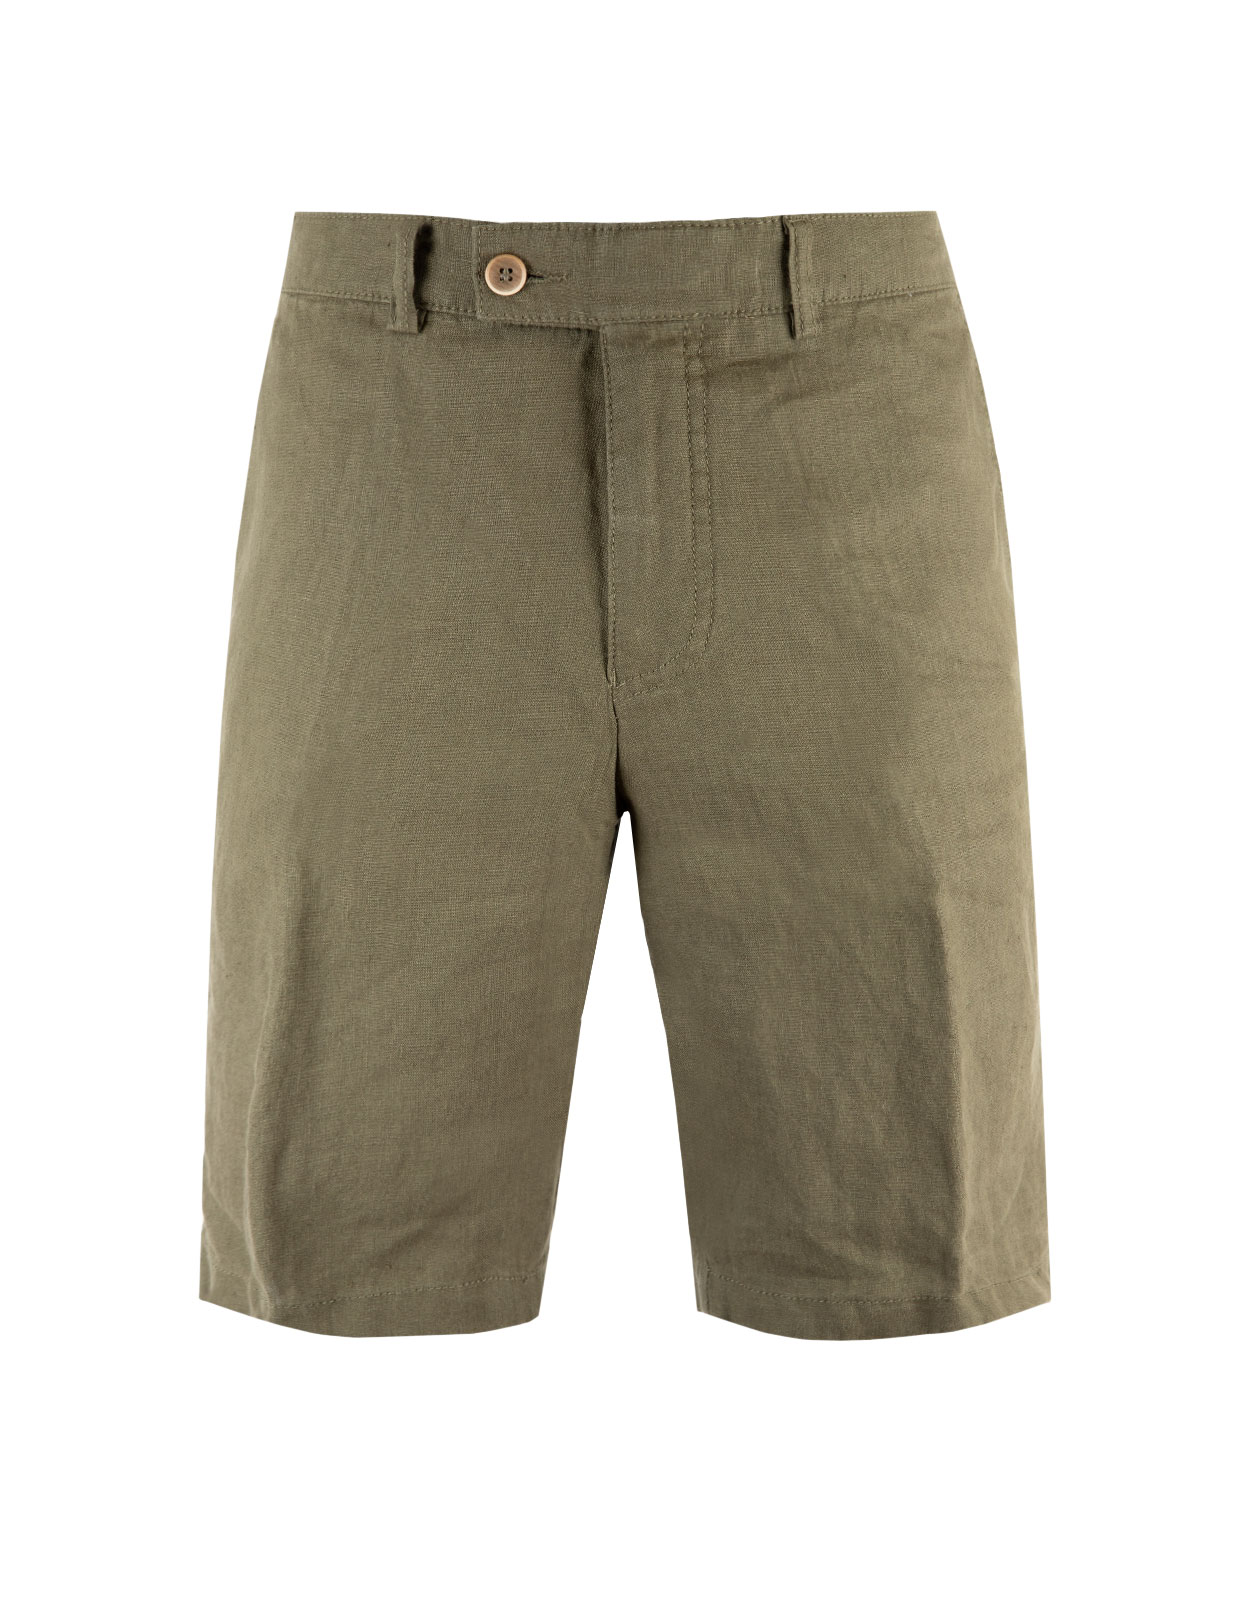 SS23 Shorts Linne Olive